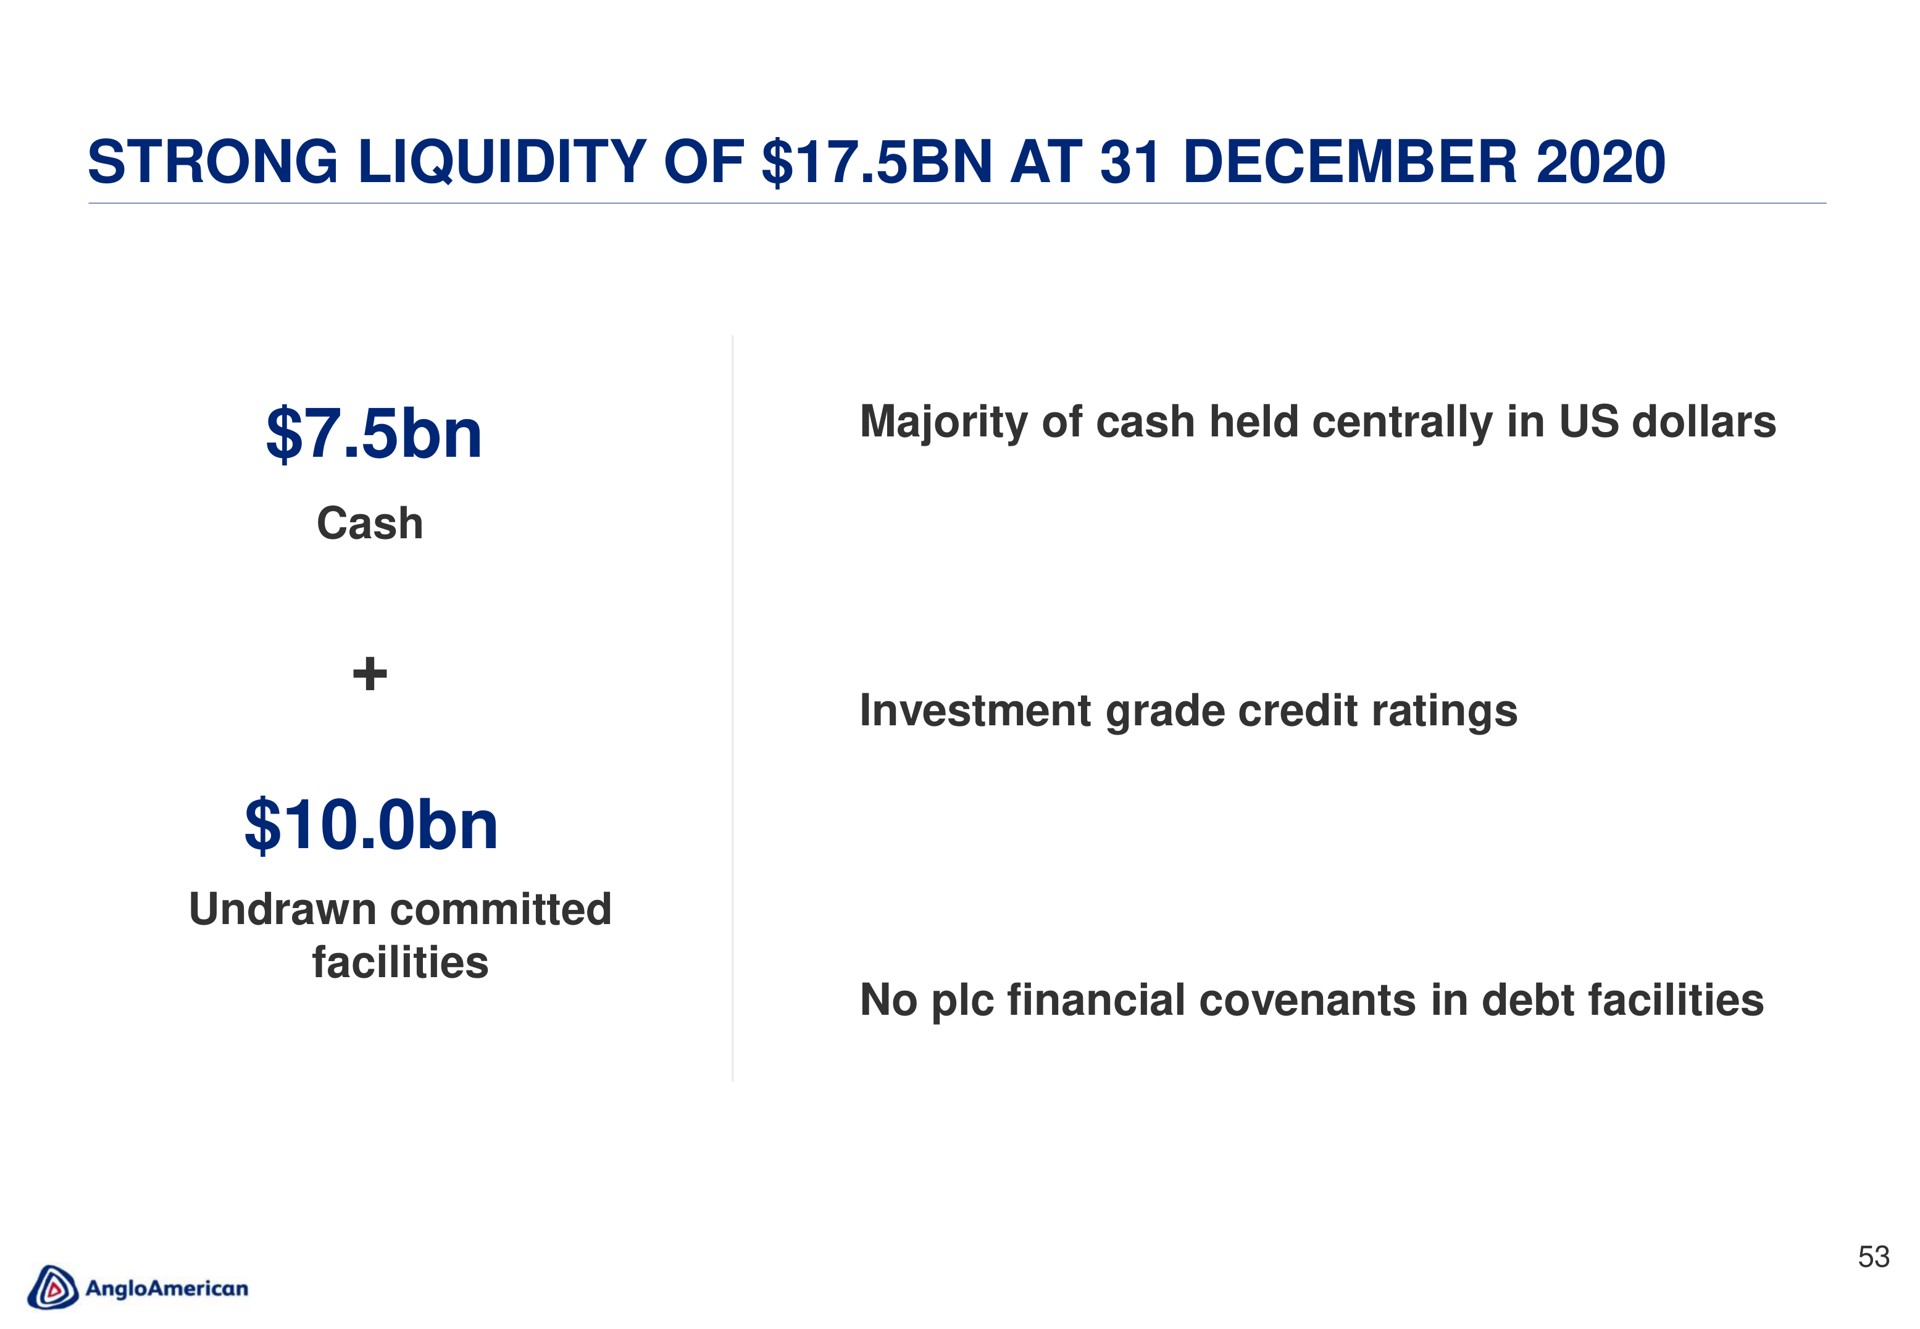 strong liquidity of at majority cash held centrally in us dollars | AngloAmerican